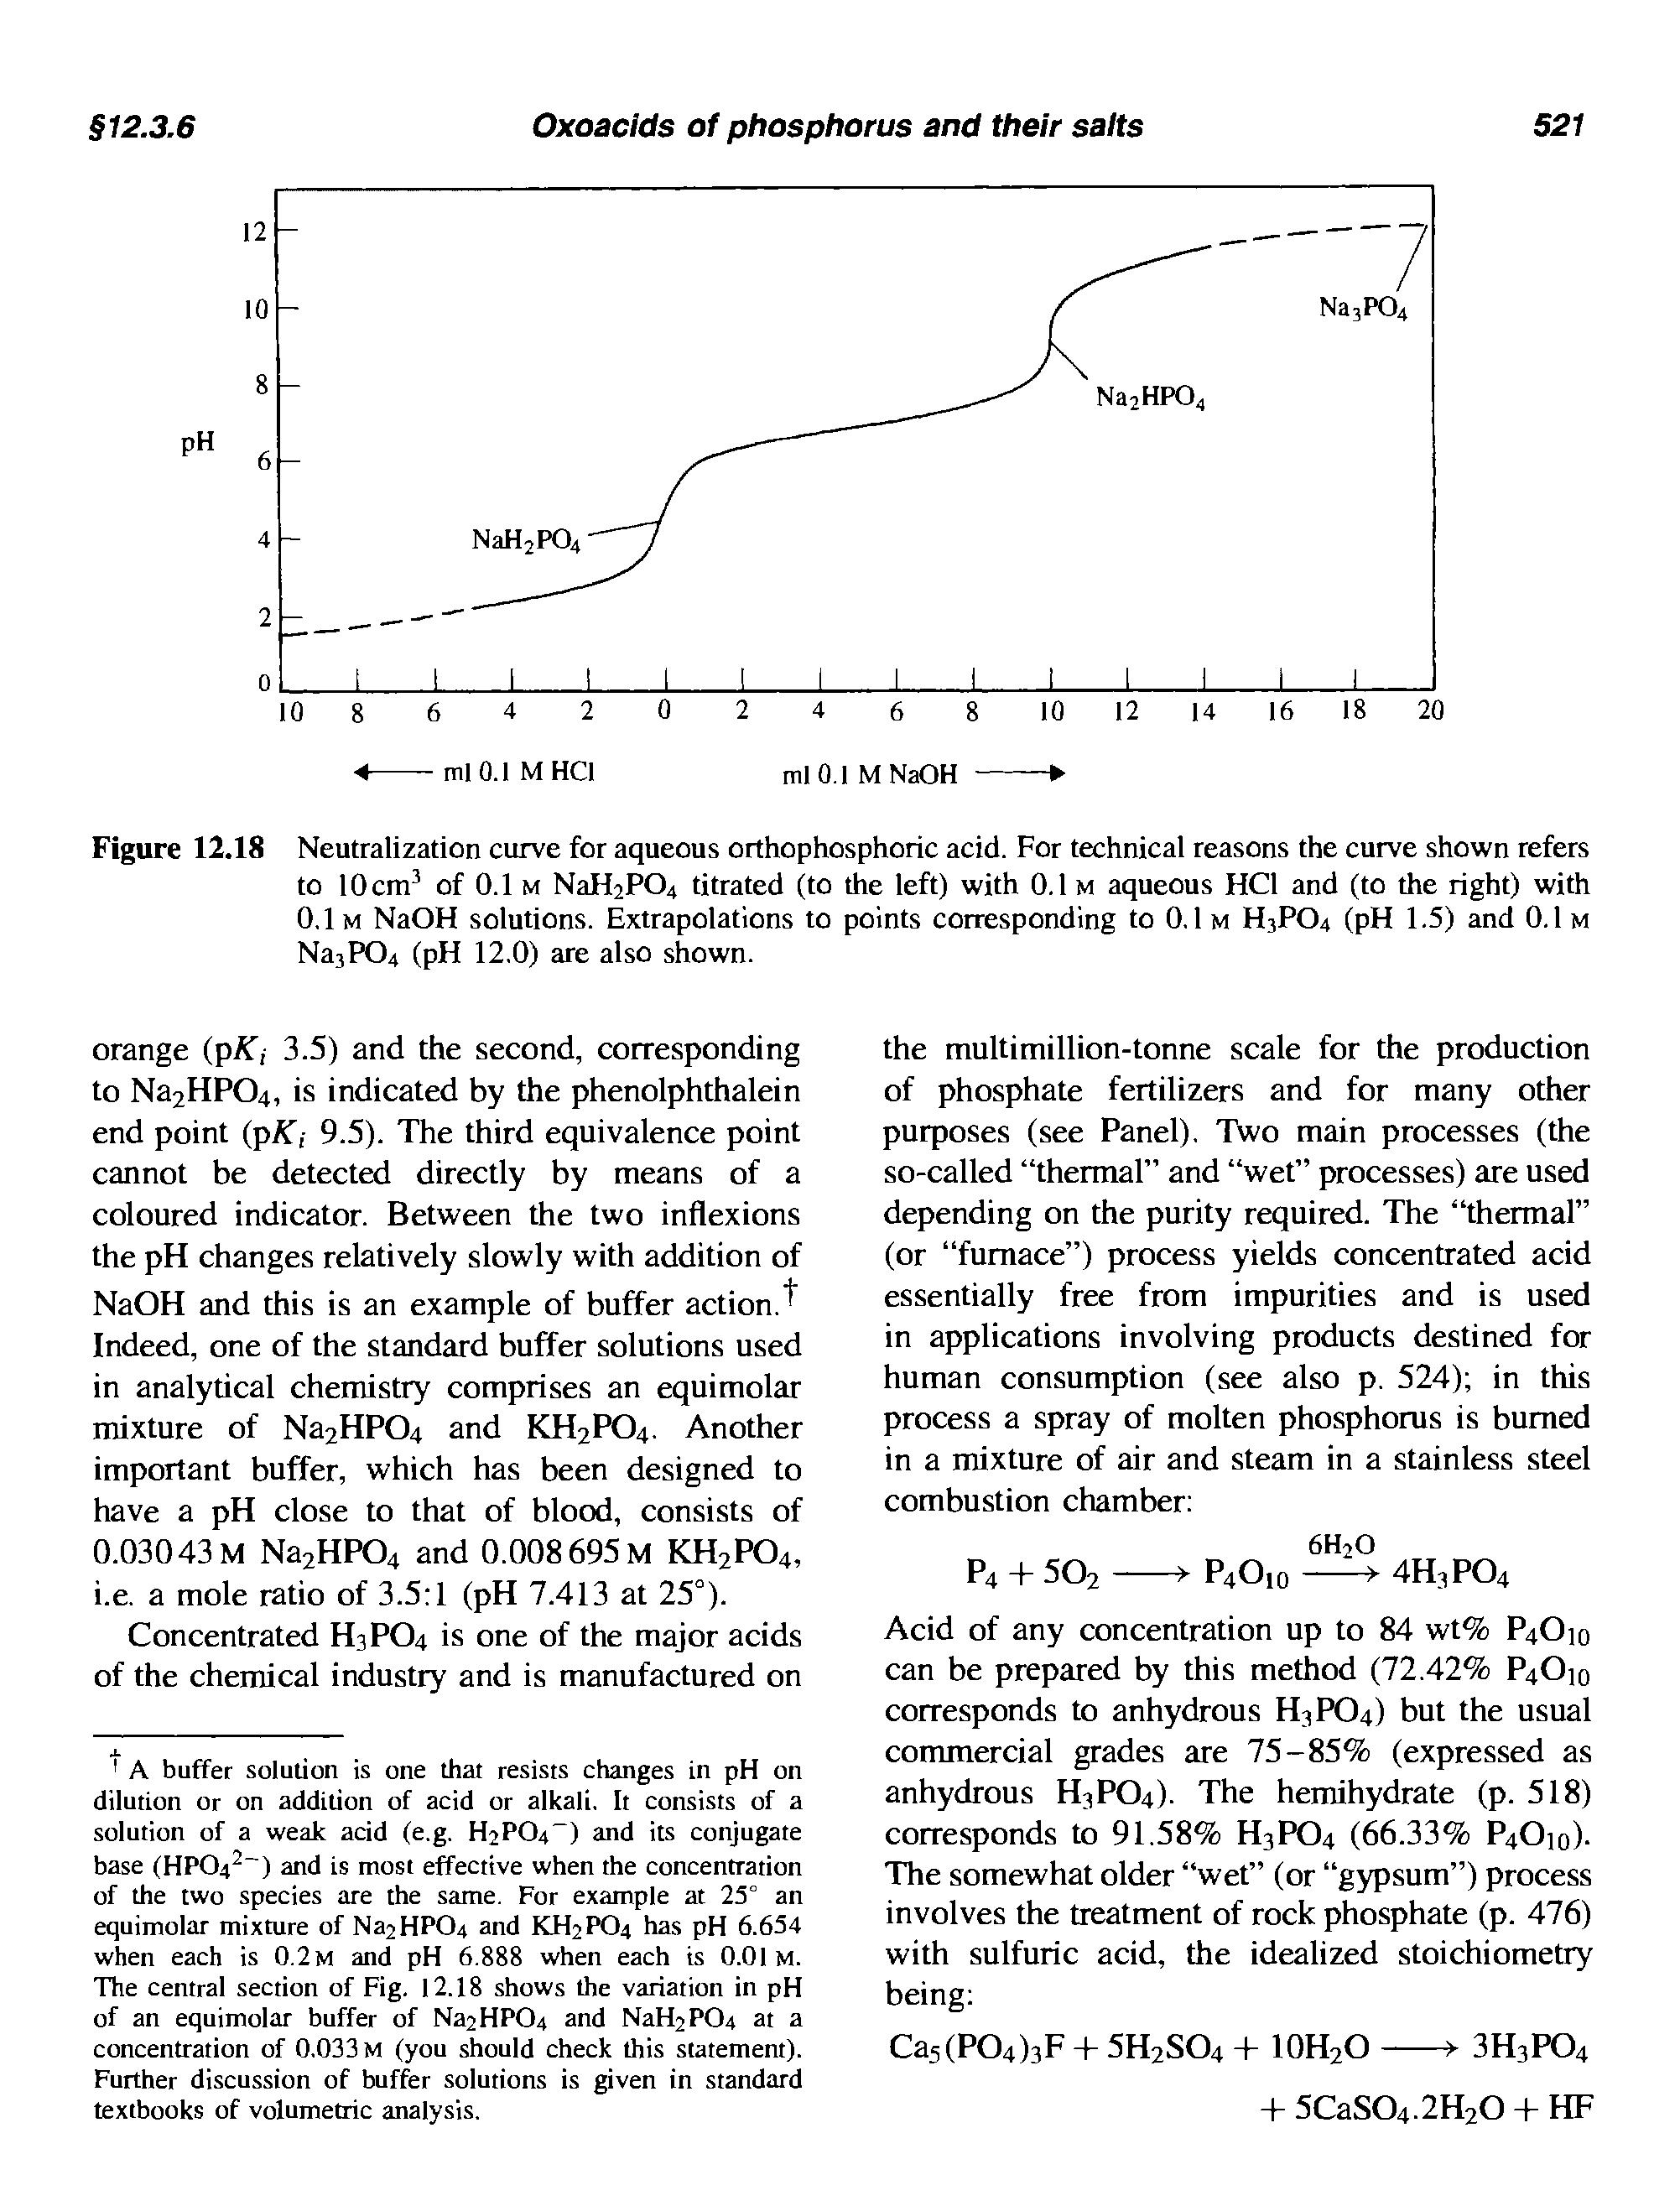 Figure 12.18 Neutralization curve for aqueous orthophosphoric acid. For technical reasons the curve shown refers to 10 cm of 0.1 M NaH2P04 titrated (to the left) with 0.1 m aqueous HCl and (to the right) with 0.1m NaOH solutions. Extrapolations to points corresponding to 0.1m H3PO4 (pH 1.5) and 0.1m Na3P04 (pH 12.0) are also shown.